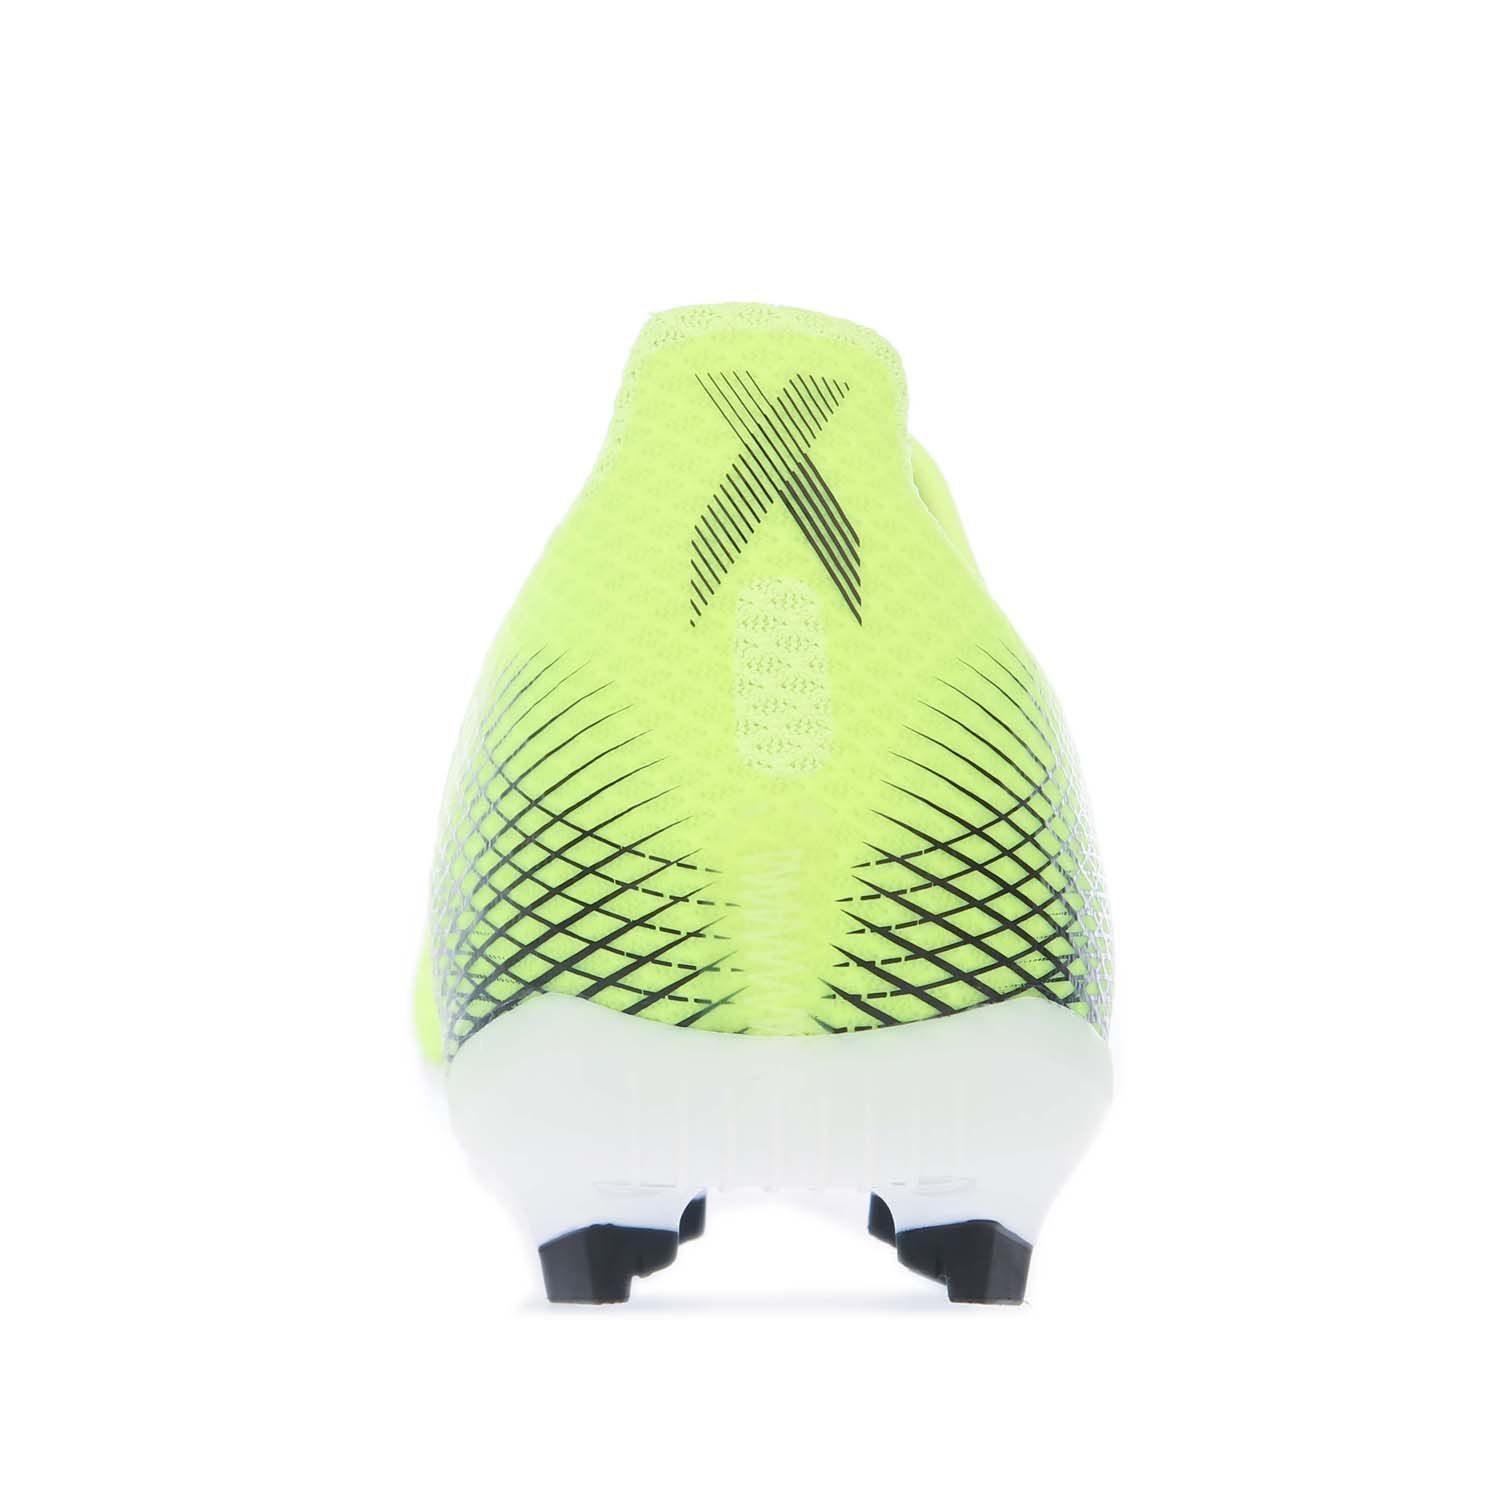 Junior Boys adidas X Ghosted.3 FG Football Boots in yellow.- Speedskin upper.- Lace fastening.- Low-cut silhouette.- Stretch tongue.- 3 stripe detail to side.- Lightweight TPU outsole.- Textile and synthetic lining  Synthetic sole.- Ref.: FW6934J